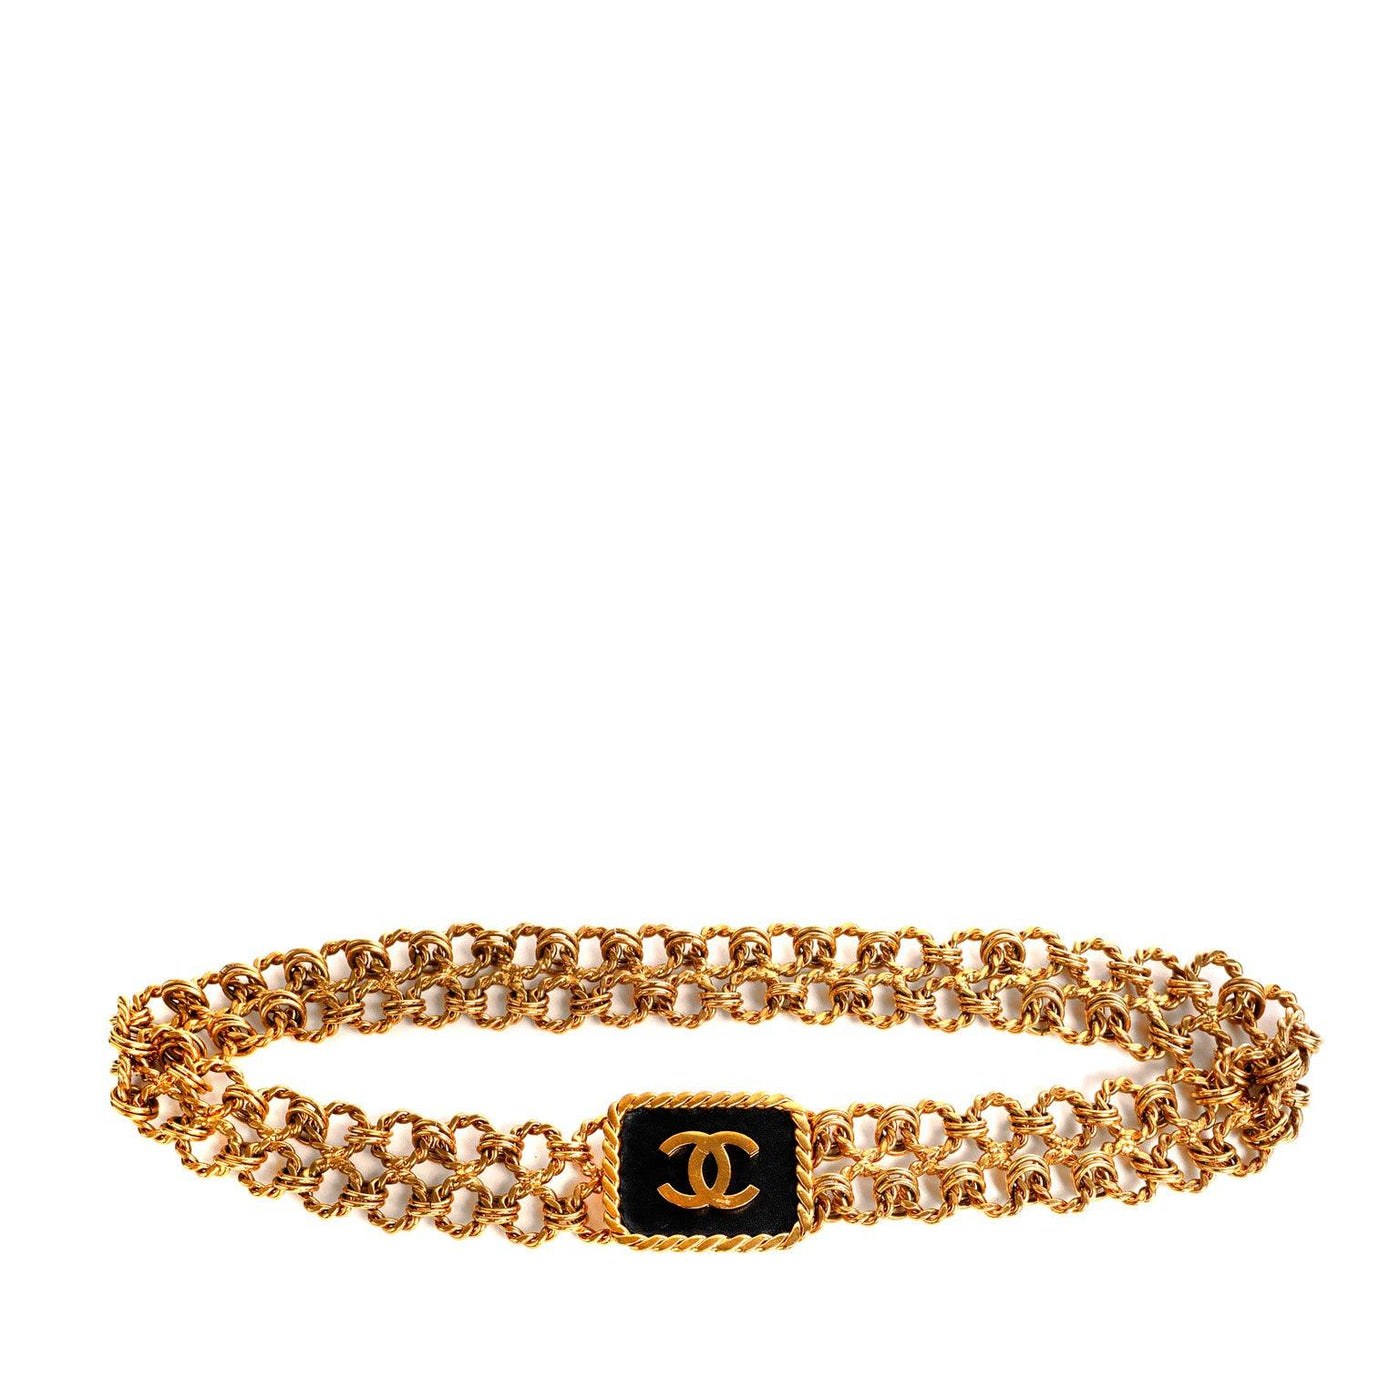 Chanel Vintage Gold Chain Belt with Black Leather CC Buckle - Only Authentics